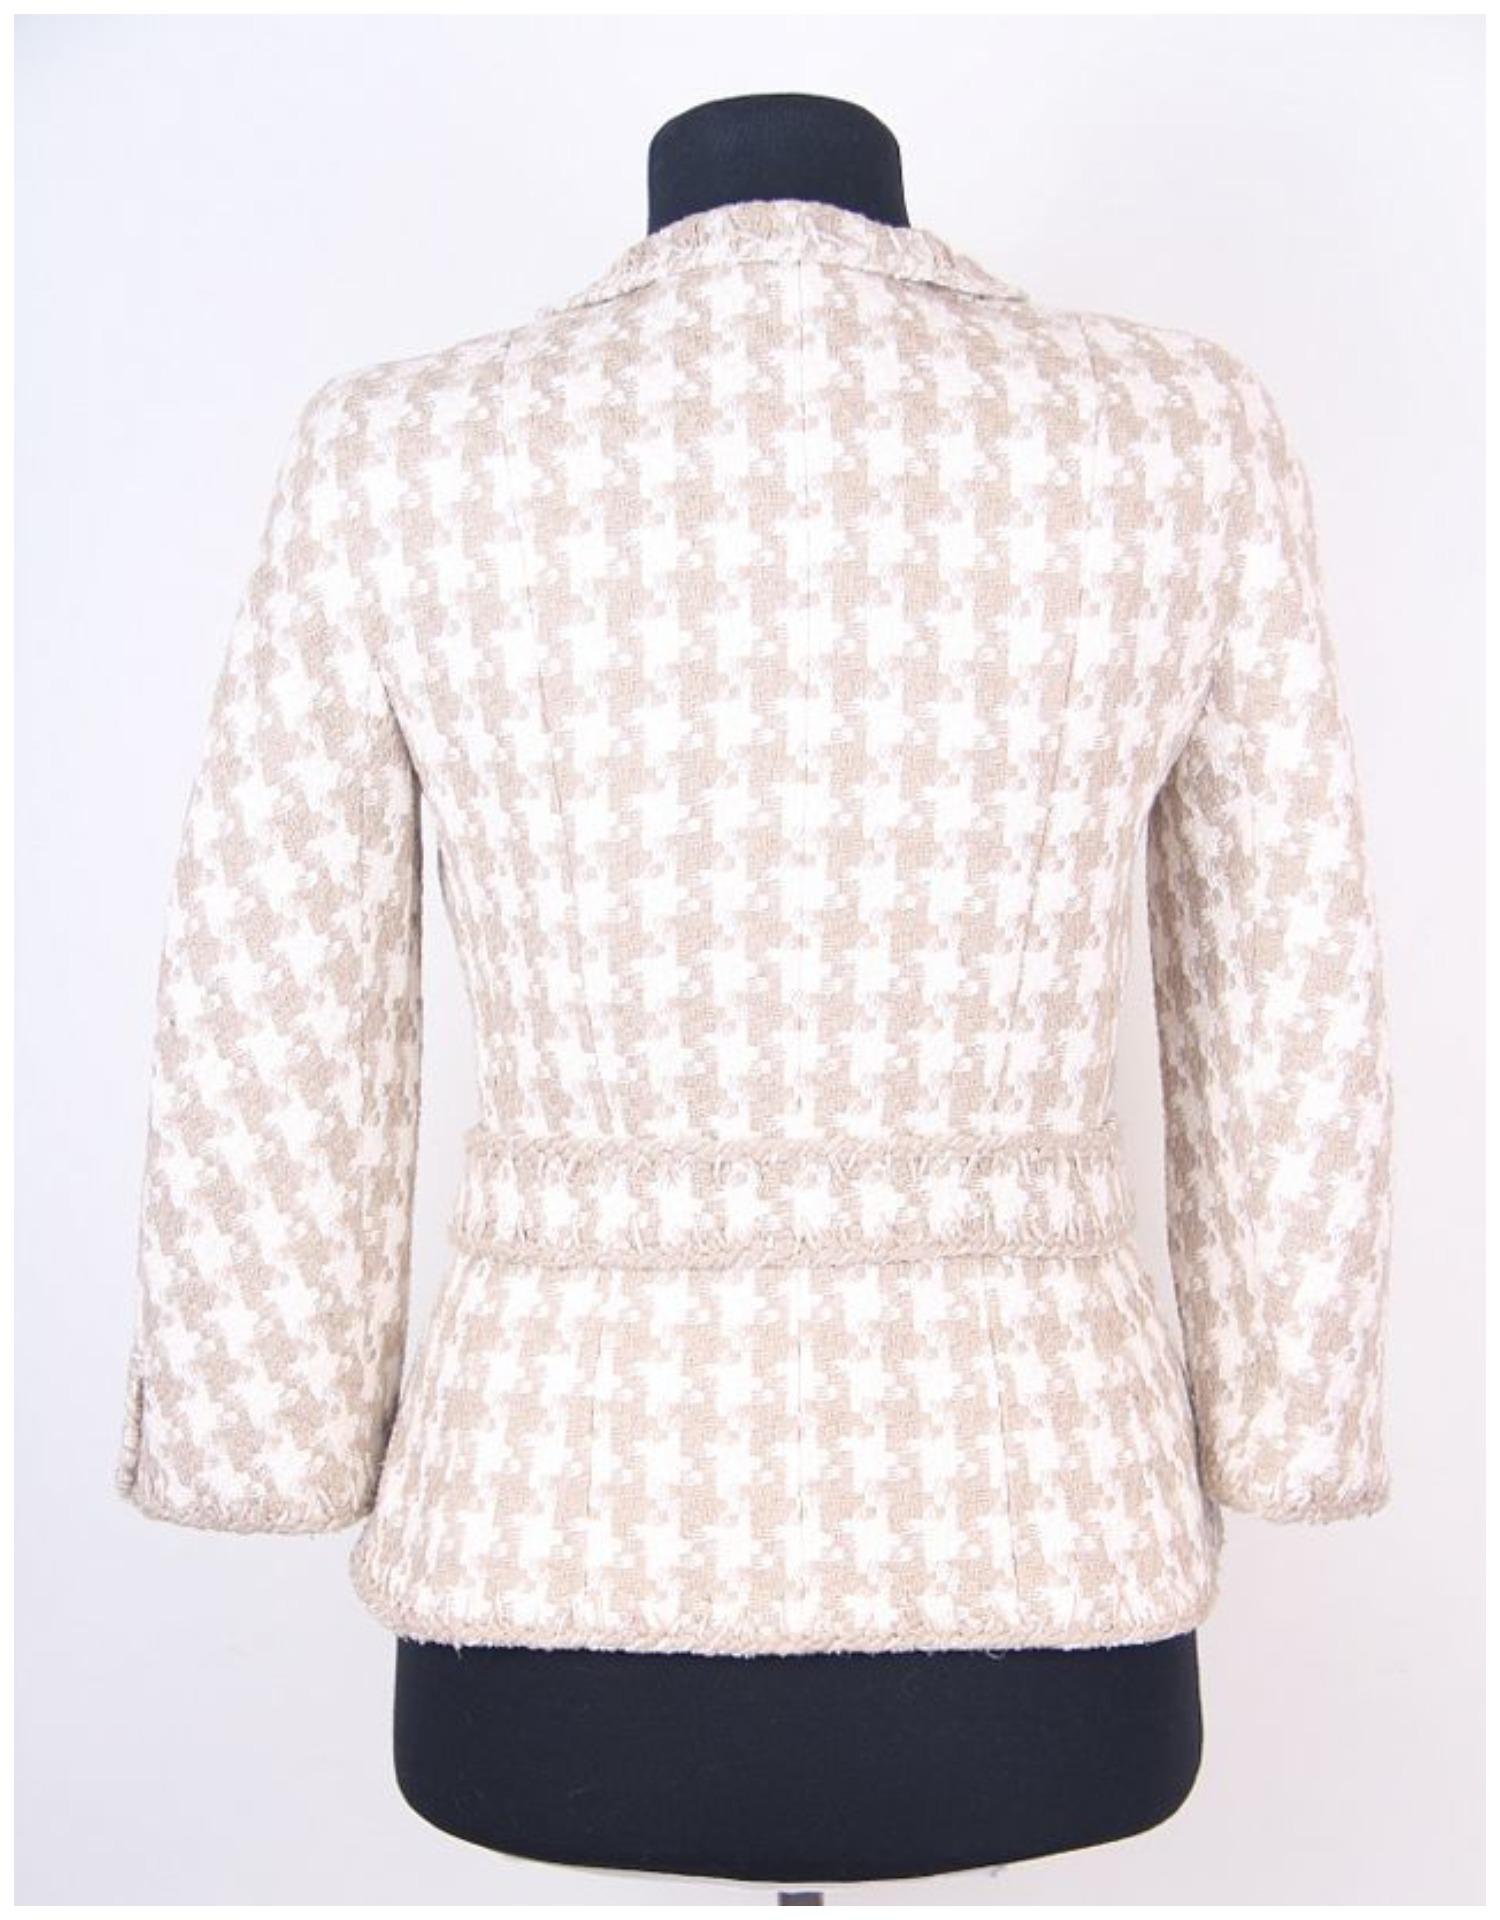 Chanel & Karl Lagerfeld 08P 2008 Beige/White Hound's-Tooth Tweed jacket 34 FR In New Condition For Sale In Алматинский Почтамт, KZ